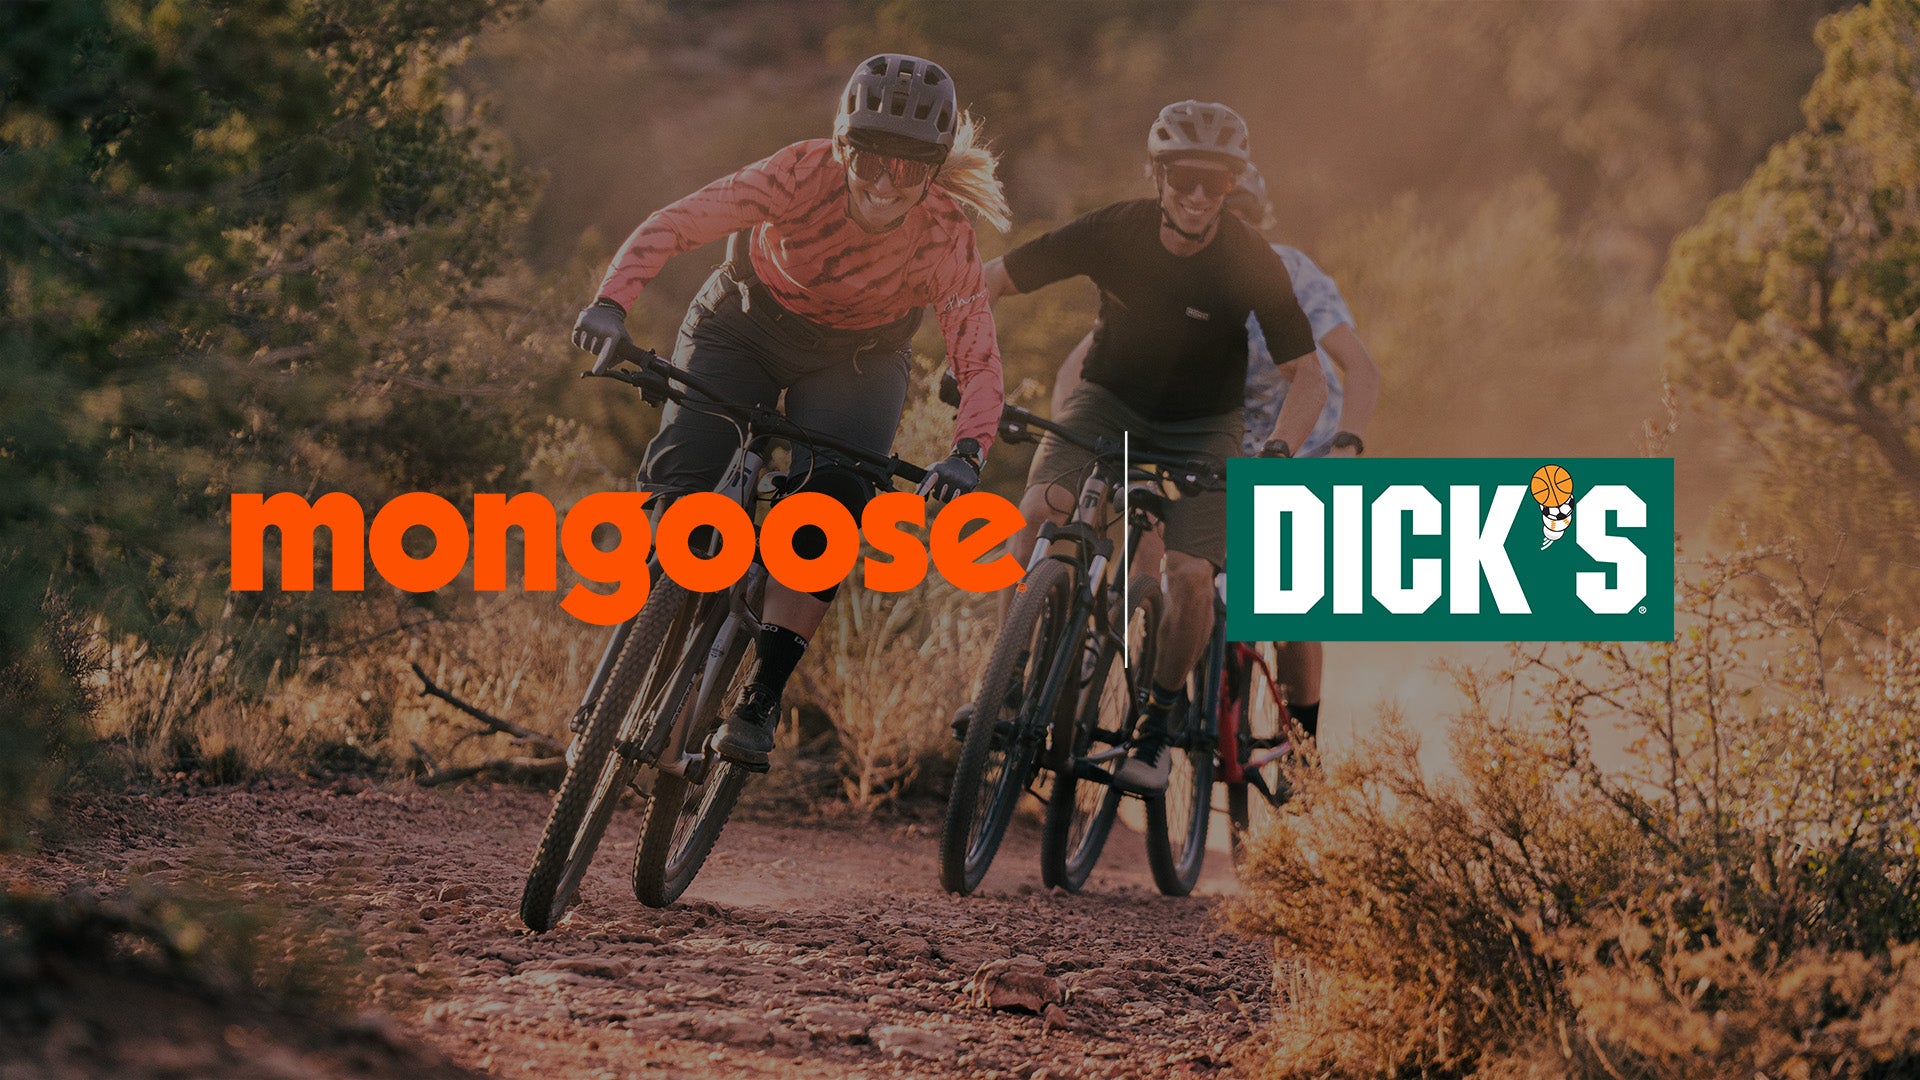 Mongoose Bikes Launches at DICK'S Sporting Goods